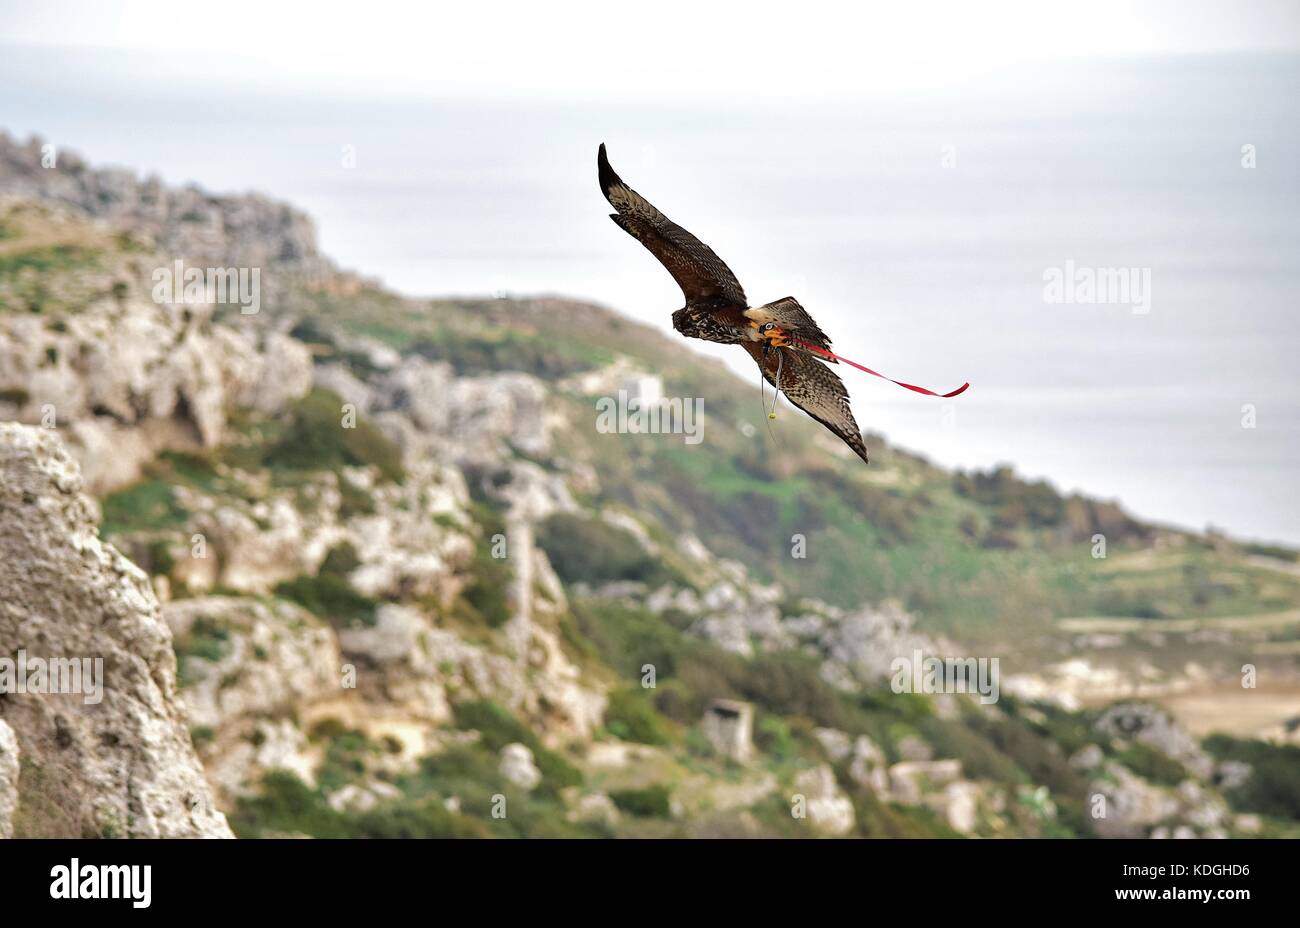 A captive harris hawk, used in falconry, taken out by his falconer for a training flight. Its wings spread, it is flying over the Maltese coastline Stock Photo